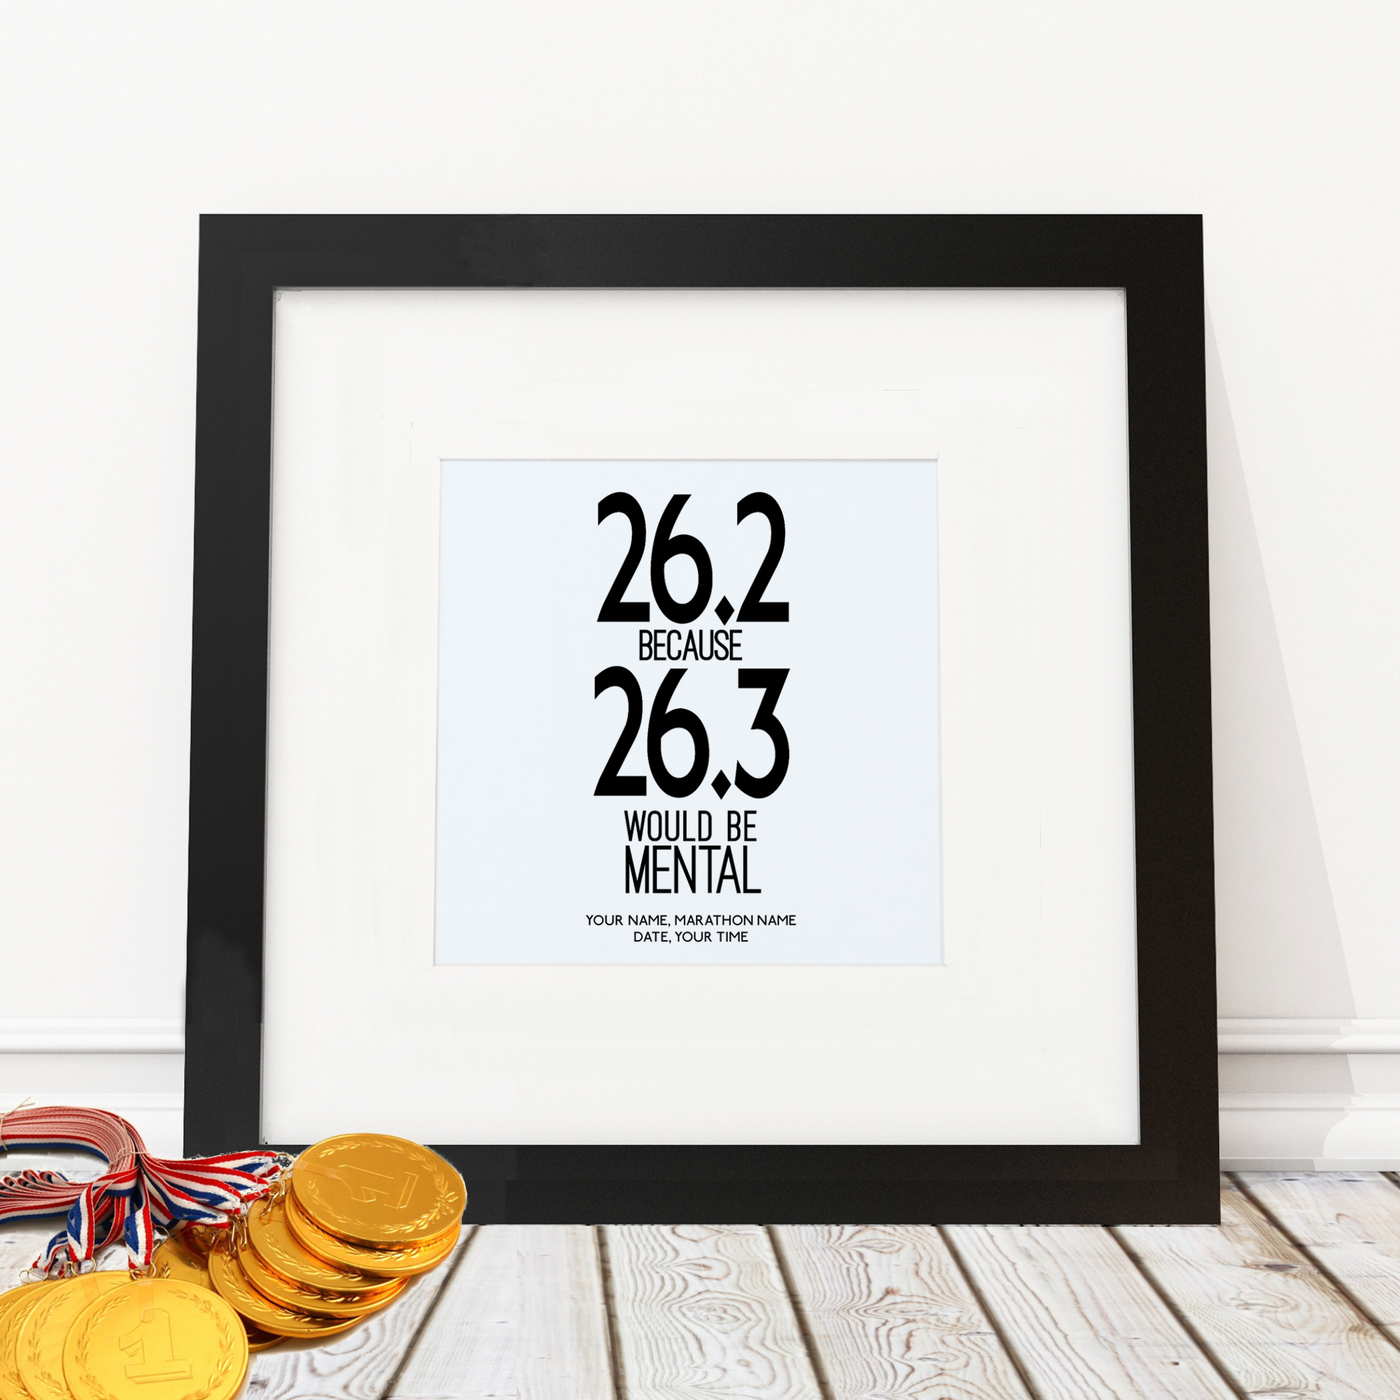 Personalised - 26.2 because 26.3 - Framed Print